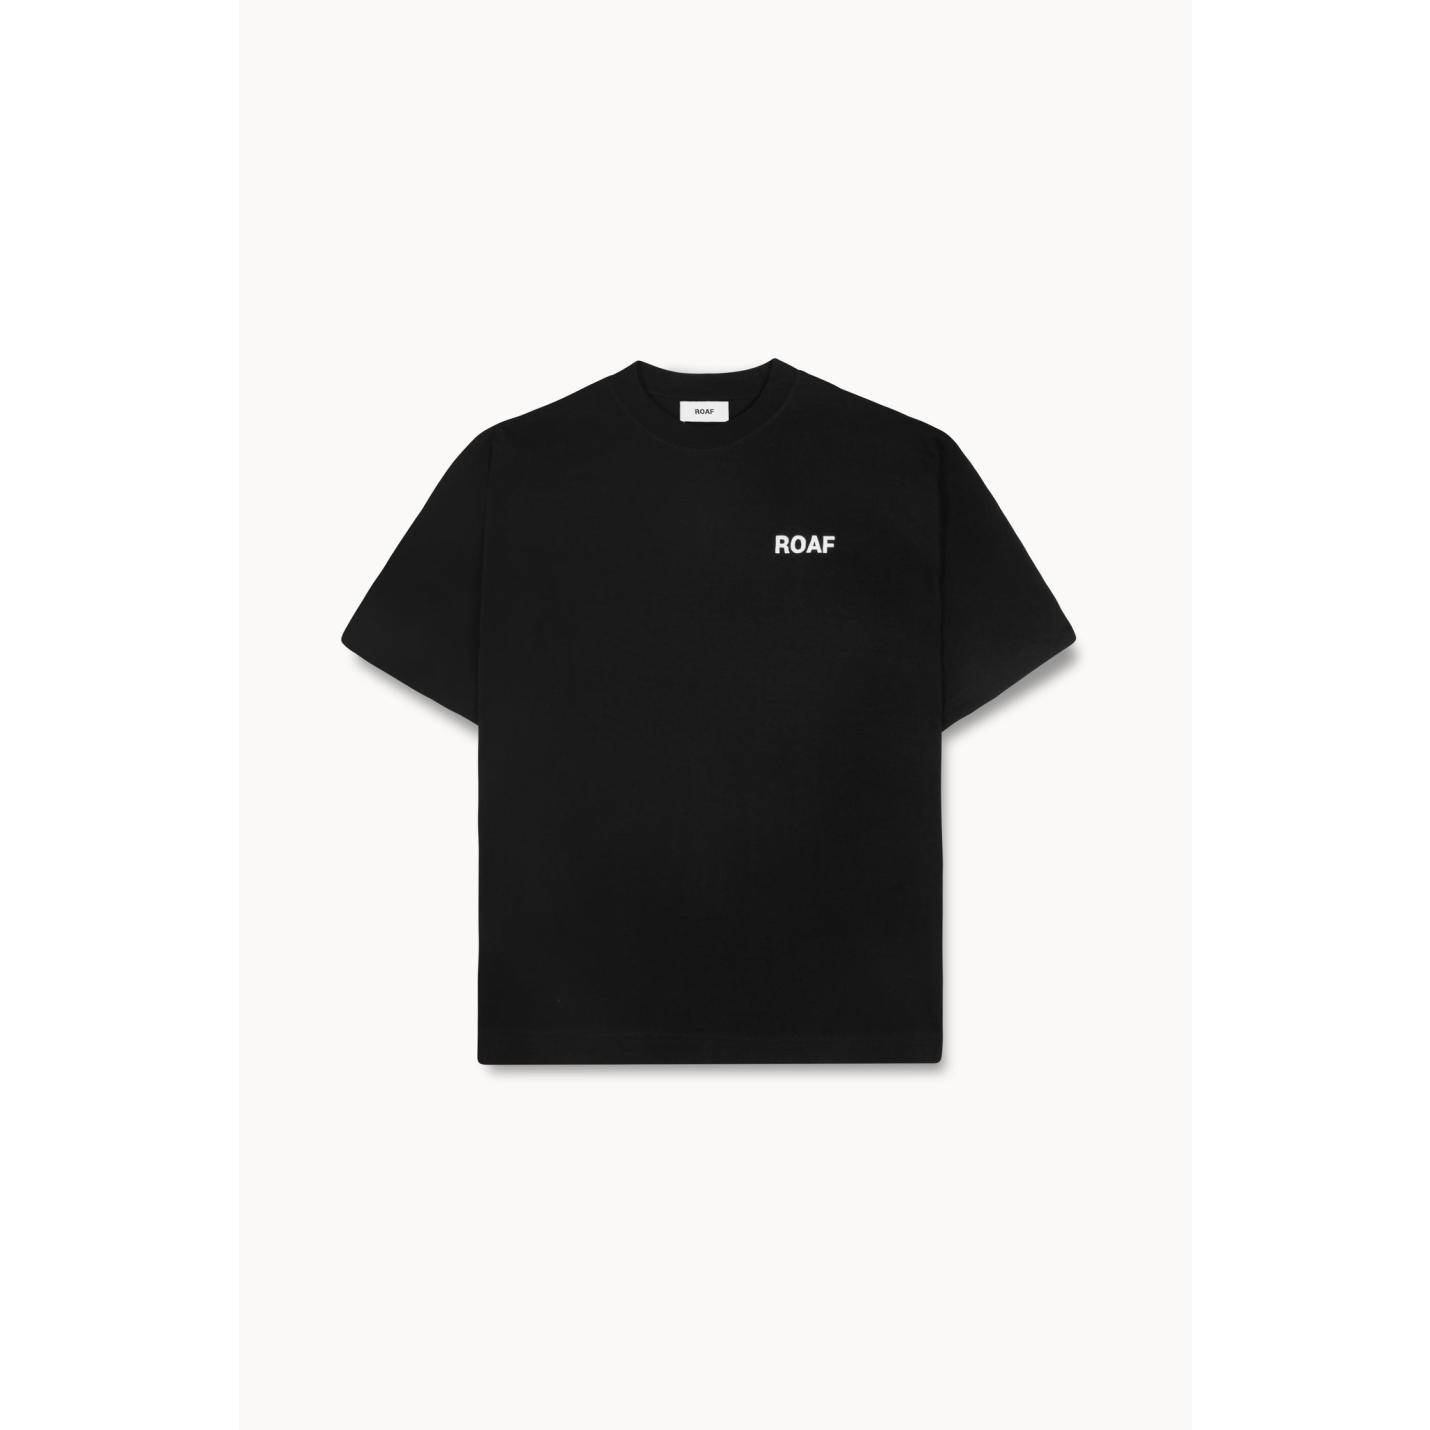 ROAF Logo Tee in Washed Black Cotton - XXL